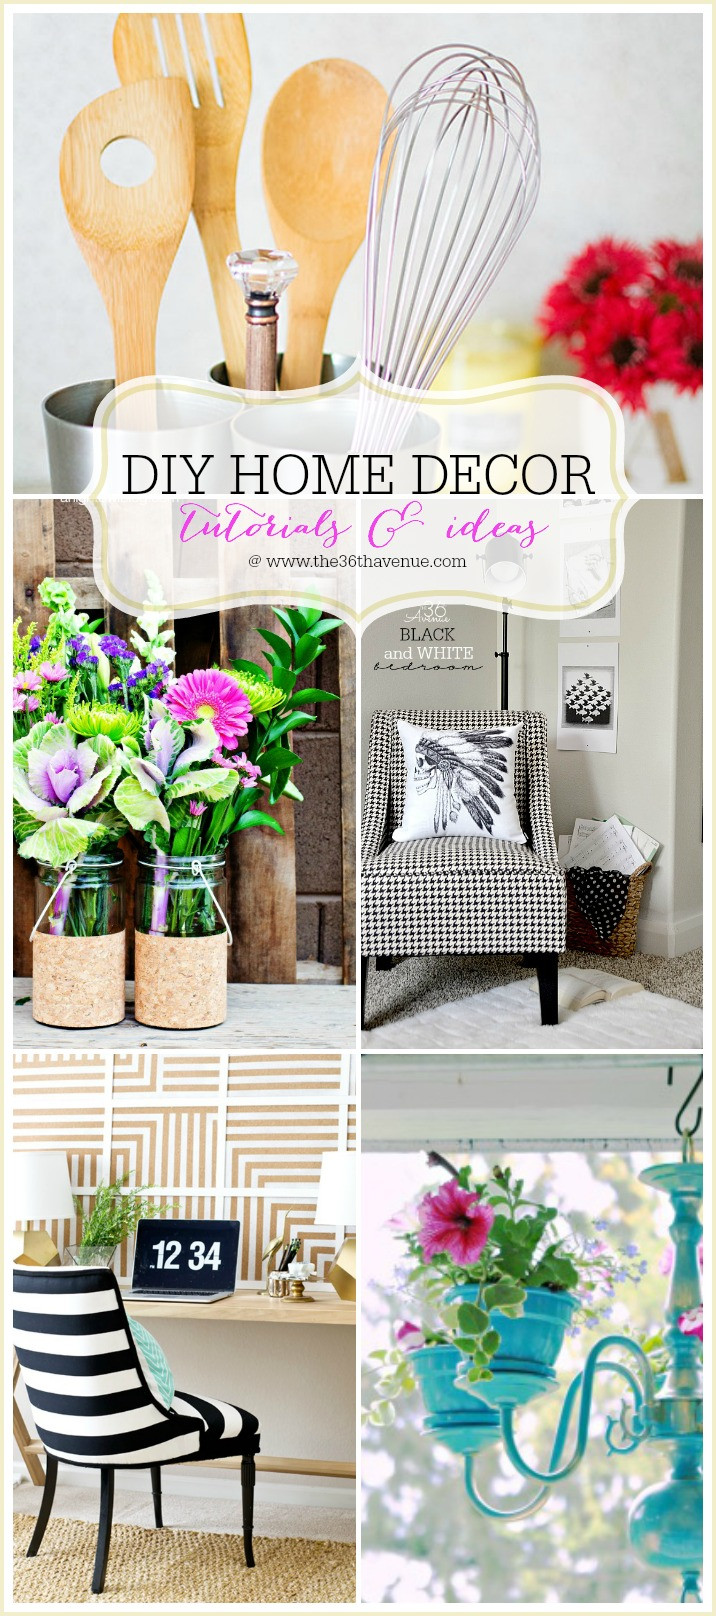 Easy Craft Ideas For The Home
 Home Decor DIY Projects The 36th AVENUE